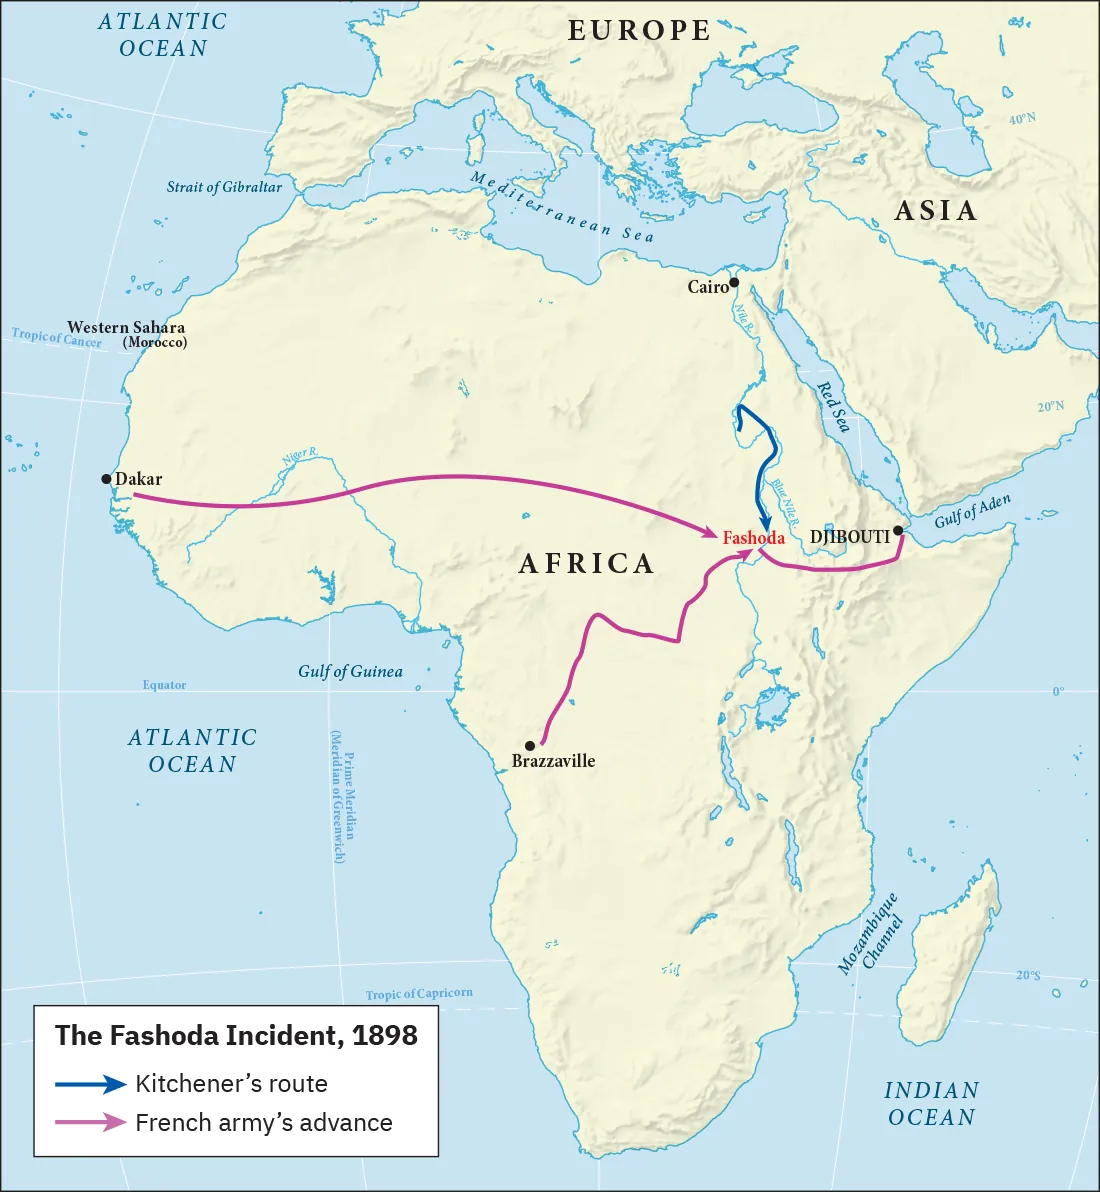 A map of Africa is shown. The map is labeled “The Fashoda Incident, 1898.” A blue arrowed indicating “Kitchener’s route” extends from a point along the Nile River south of Cairo, heads north for a small bit then heads south to the city of Fashoda. A purple arrow, indicating “French army’s advance” runs from the city of Dakar on the west coast of Africa, eastward across the continent to the city of Fashoda. Another purple arrow runs from the southwestern city of Brazzaville northeast to the city of Fashoda. A purple line runs between the cities of Fashoda and Djibouti on the Gulf of Aden.